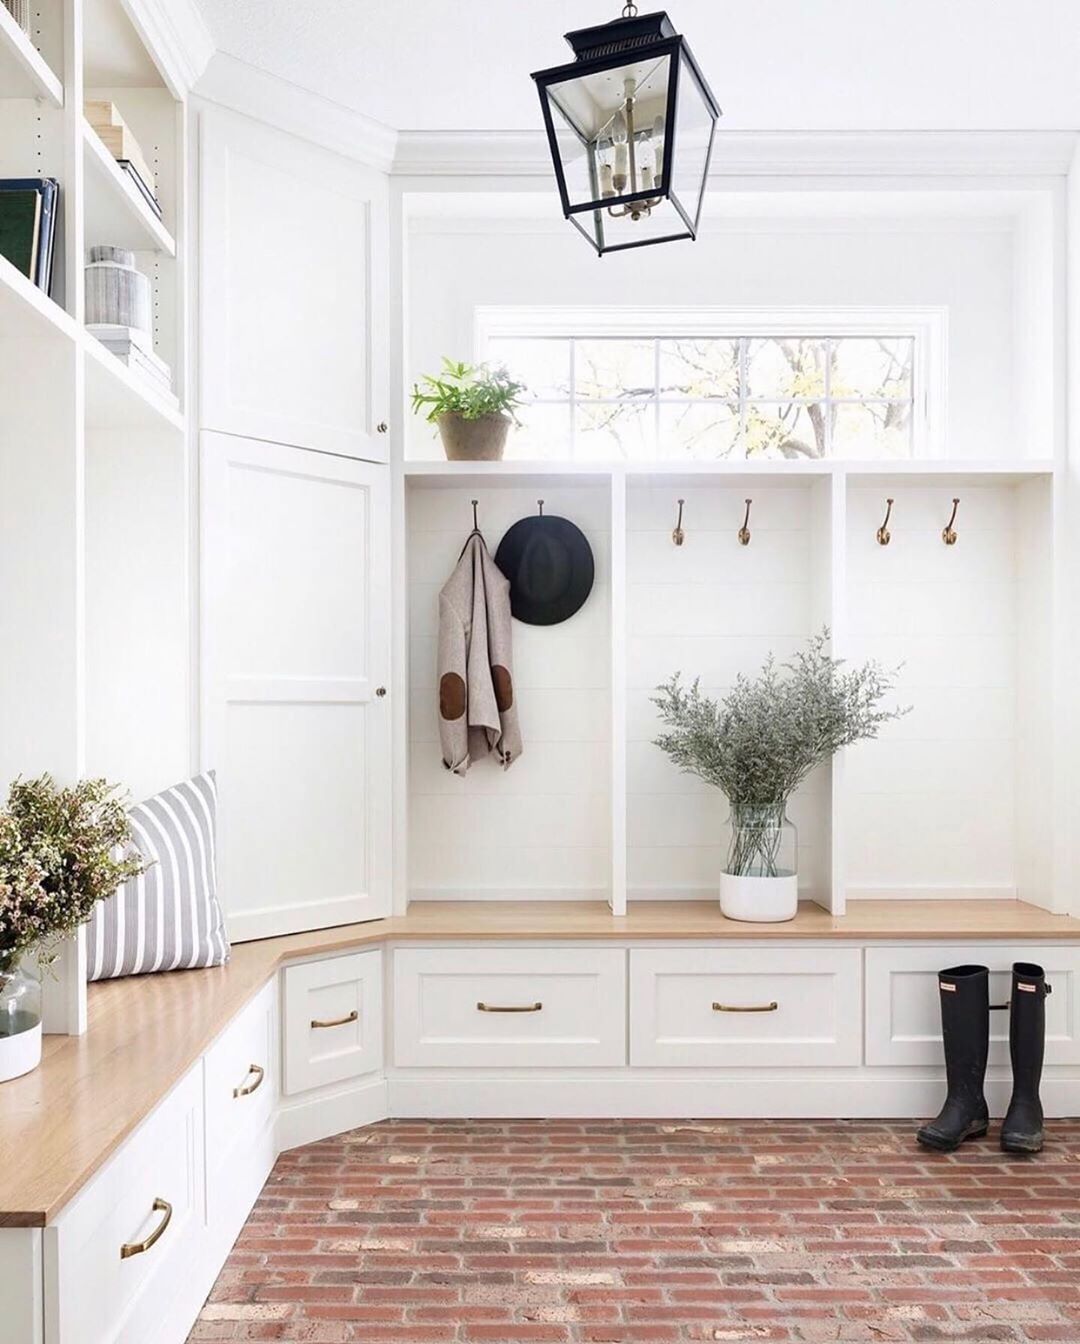 Farmhouse-style mudroom. Photo by Instagram user @happenings_of_our_farmhome